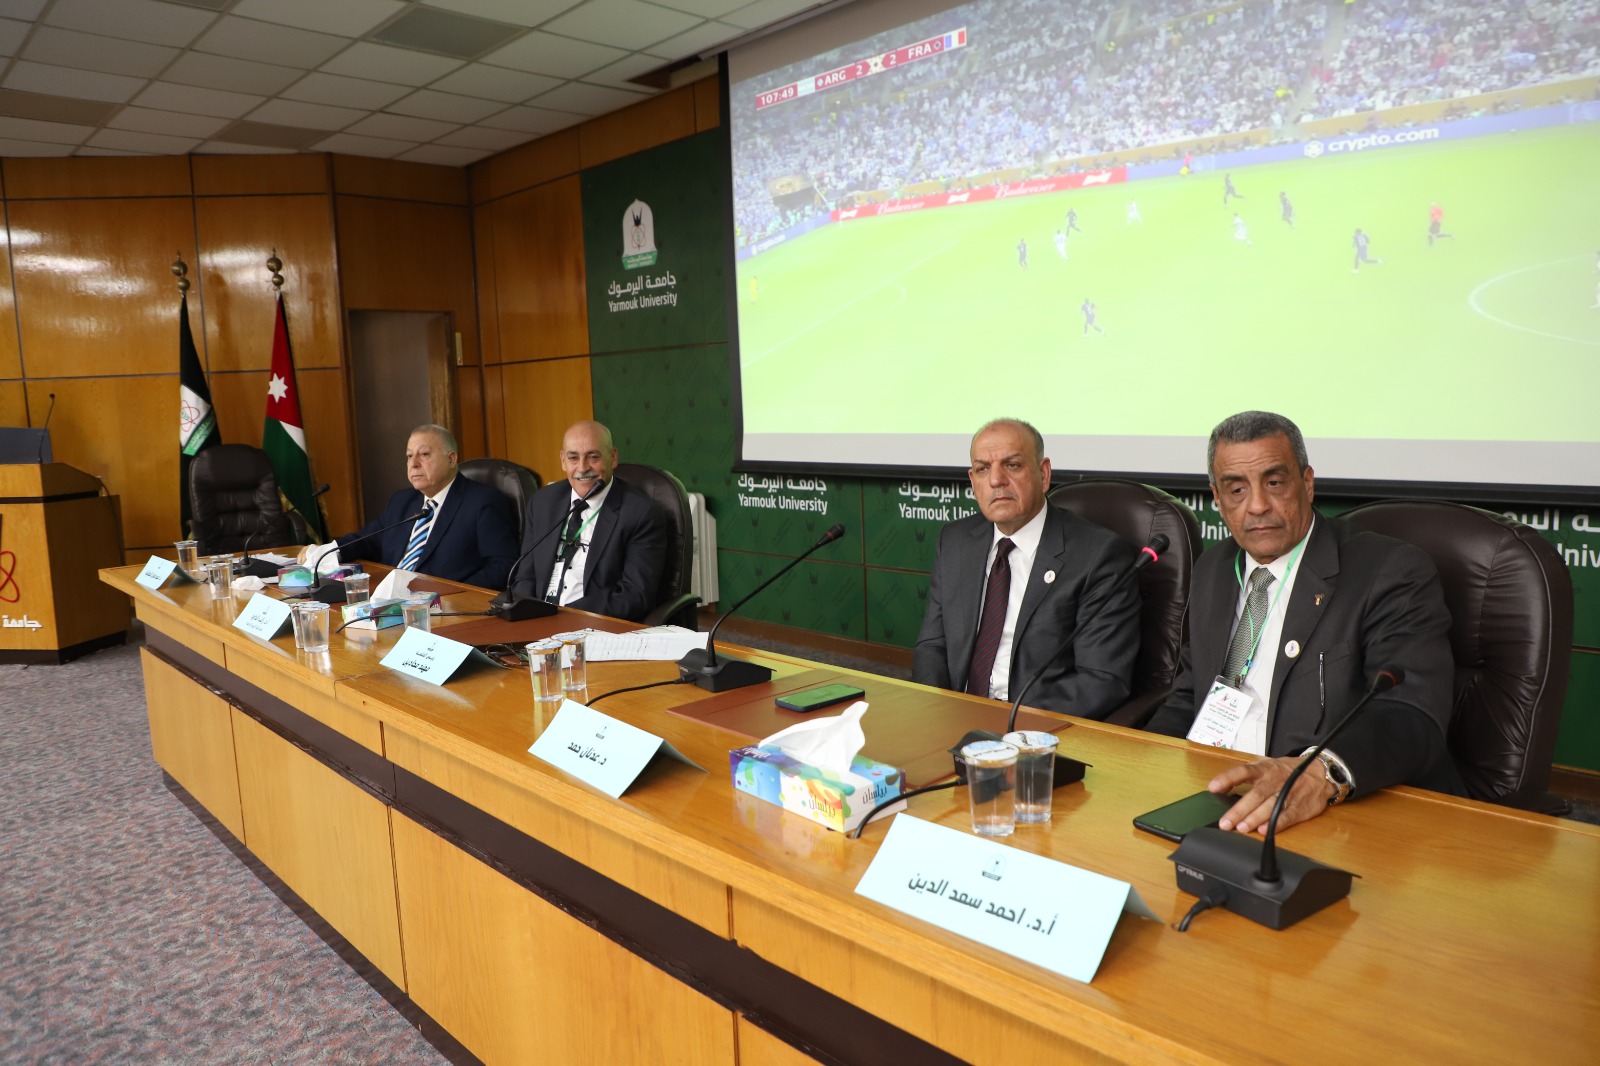 launching the Conference "Sports in Light of Global Developments - Qatar 2022 World Cup as a Model"